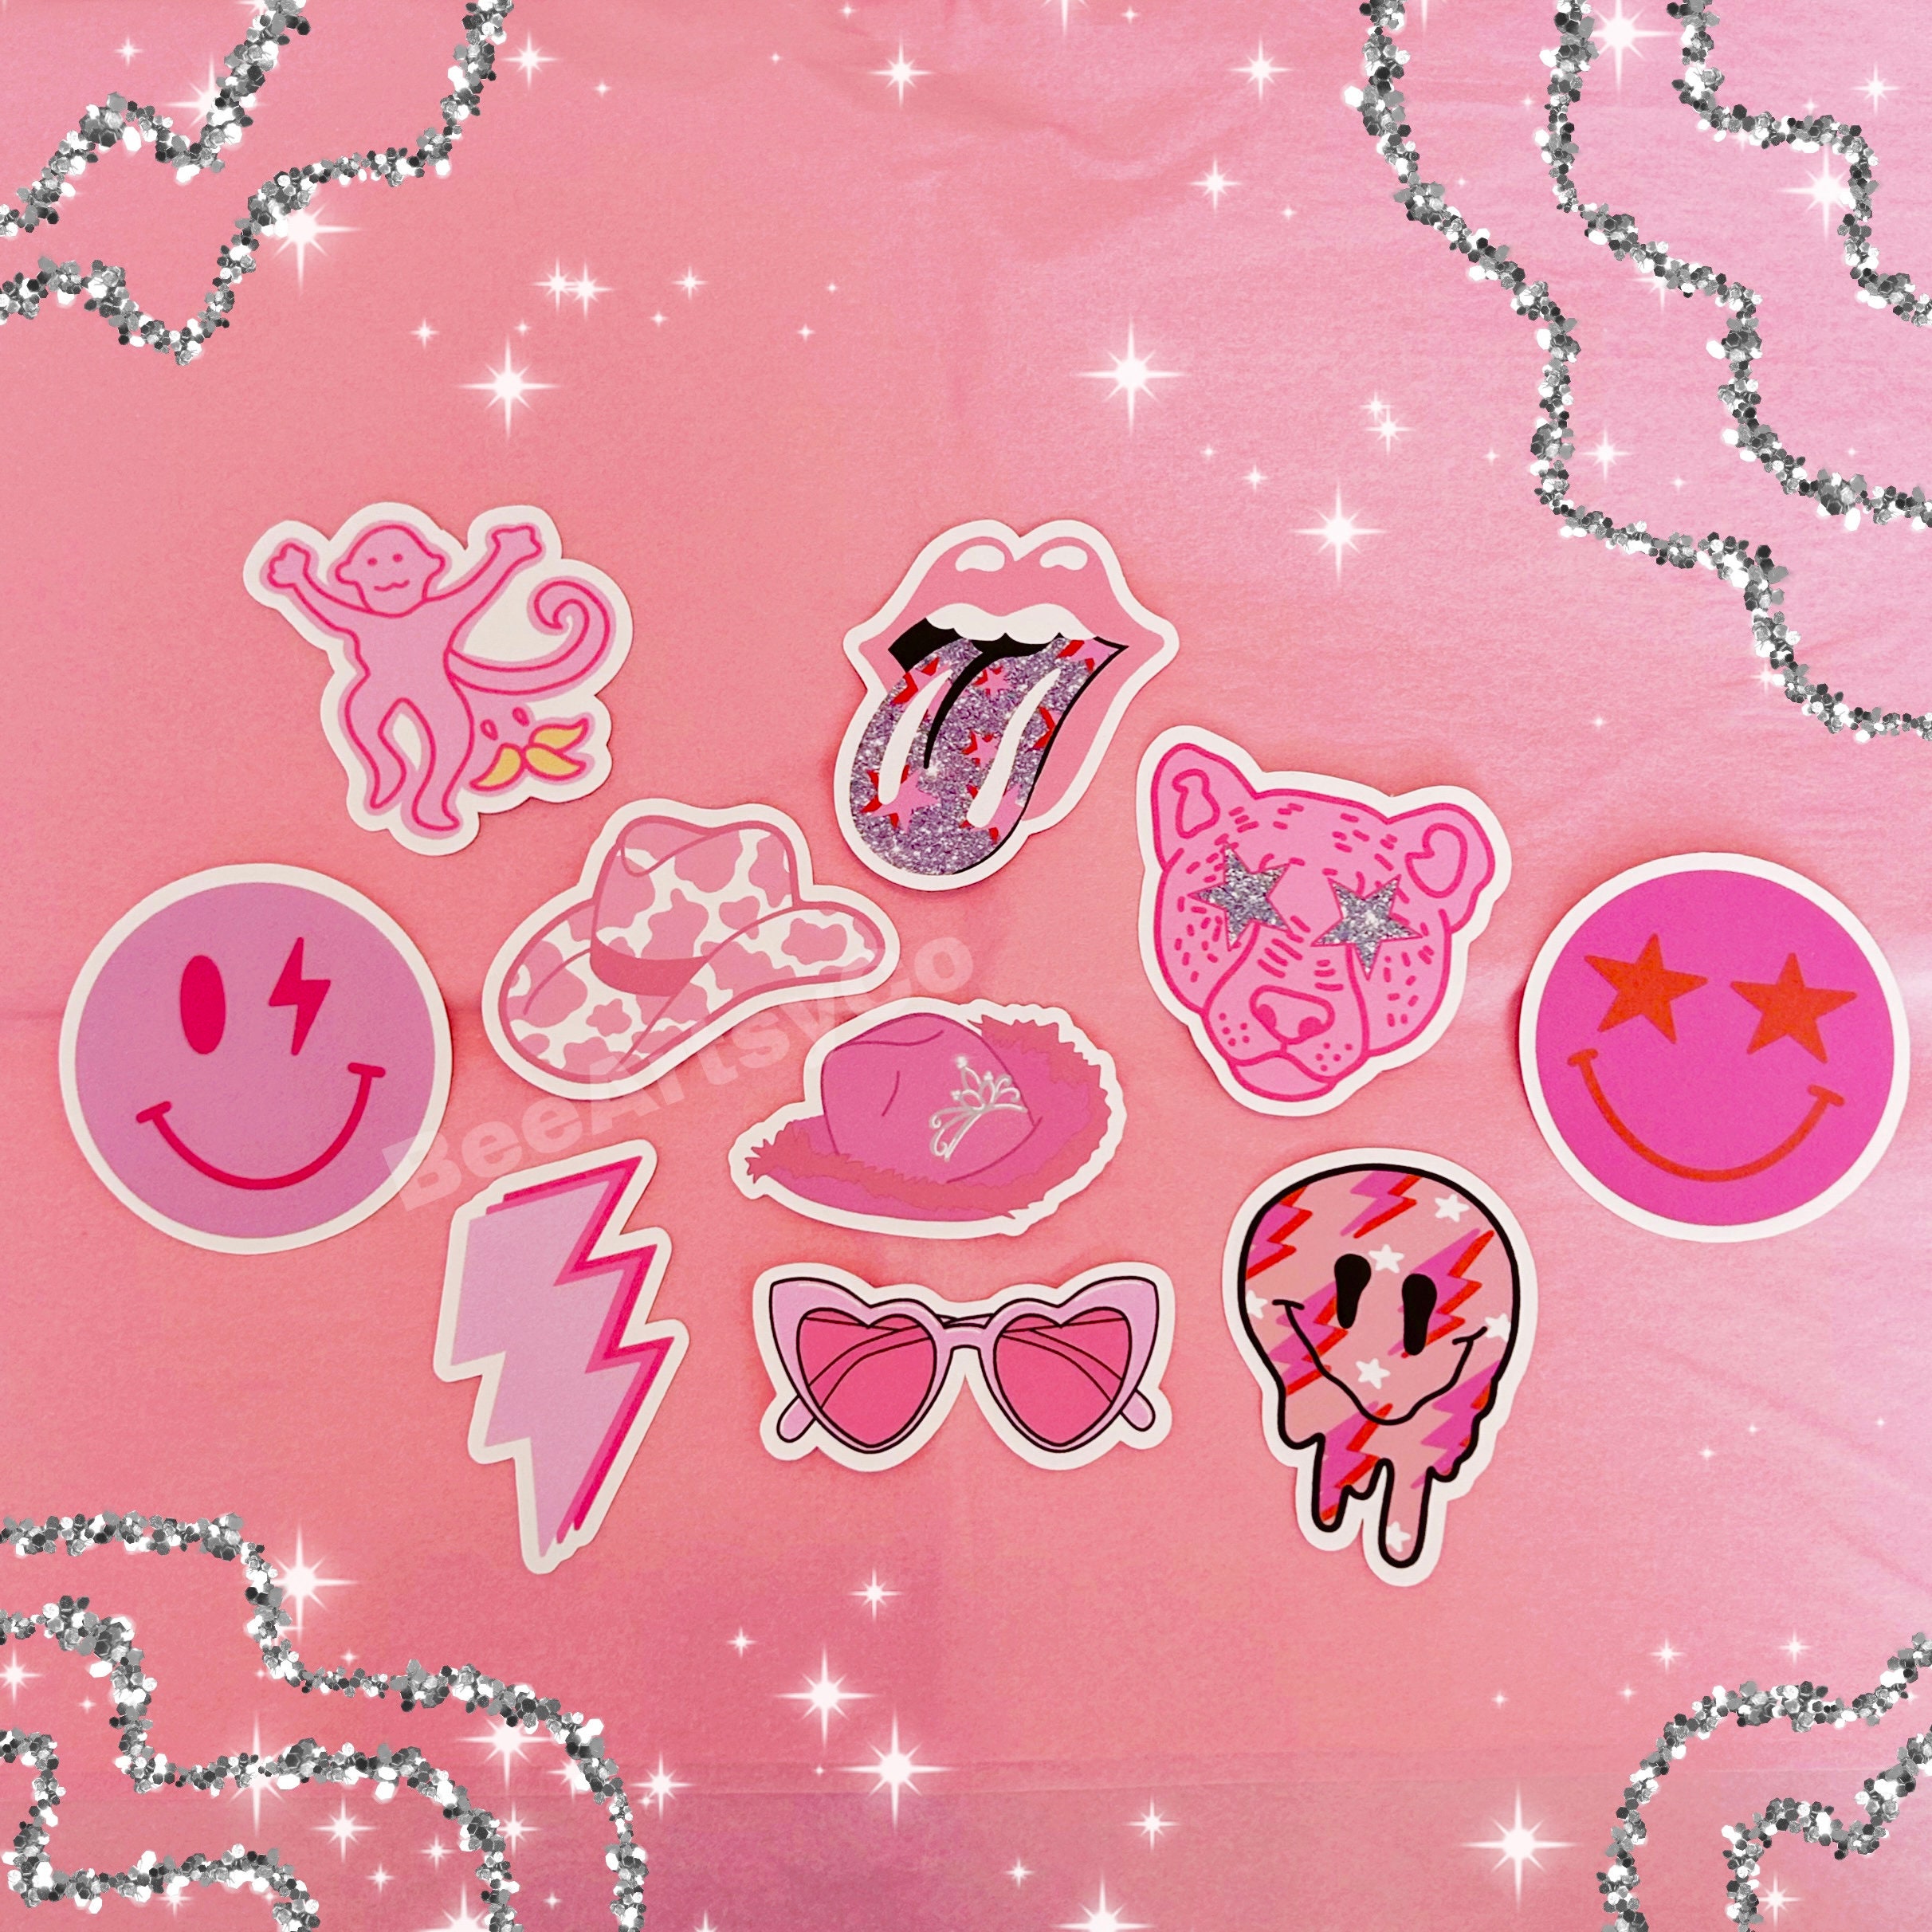 Qpout 120pcs Preppy Stickers Pink Cute Vinyl Aesthetic Girly